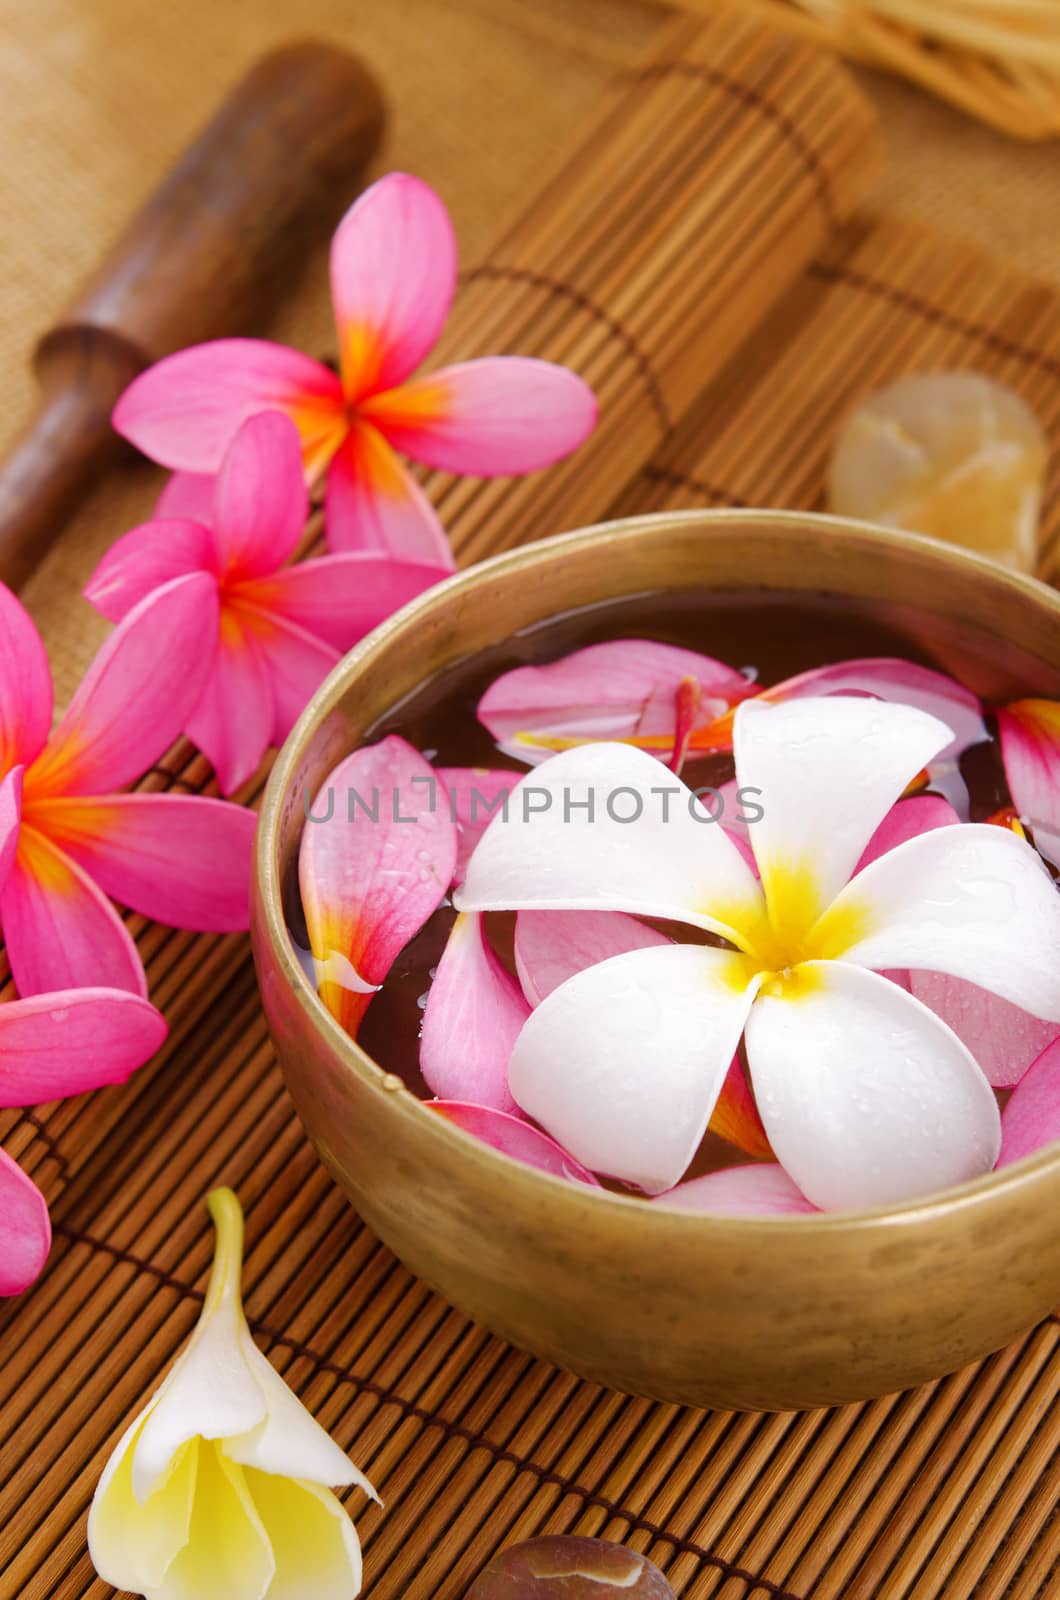 Spa setting, low light with ambient. Frangipani, hot and cold stone on bamboo mat.